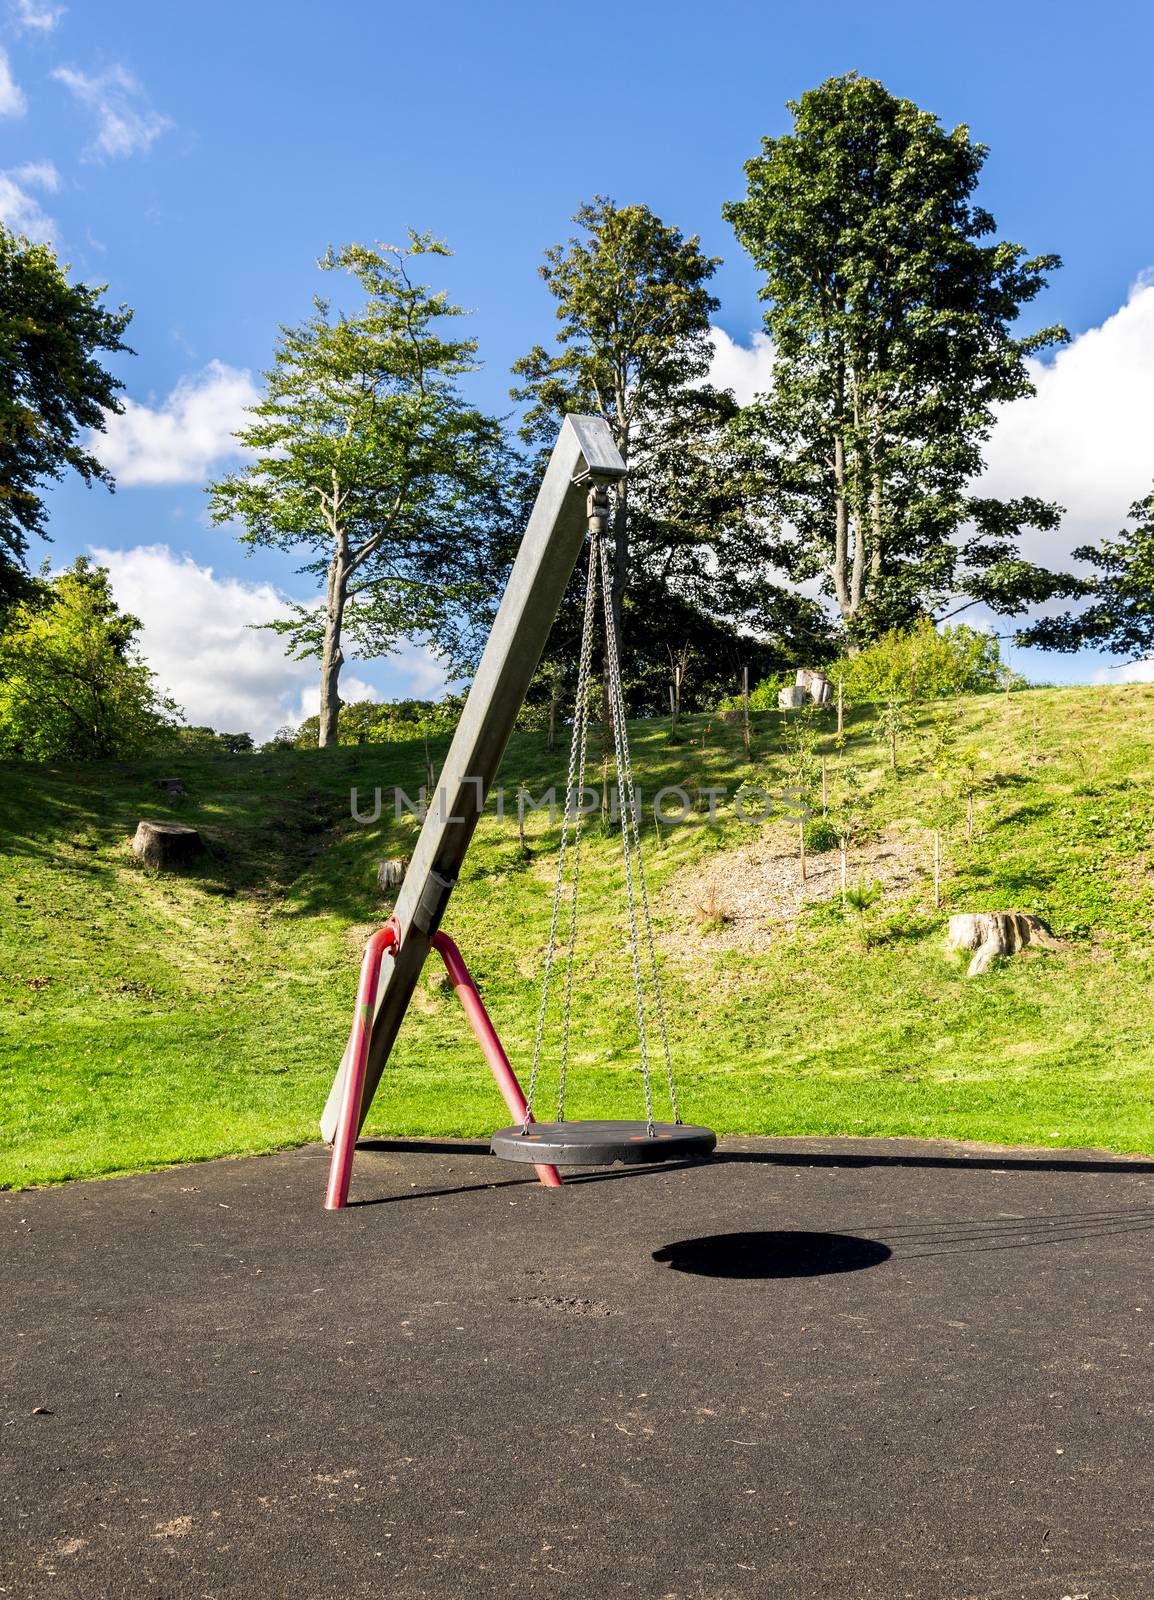 A swing with a rubber round seat hanging on four chains in Duthie park playground, Aberdeen, Scotland